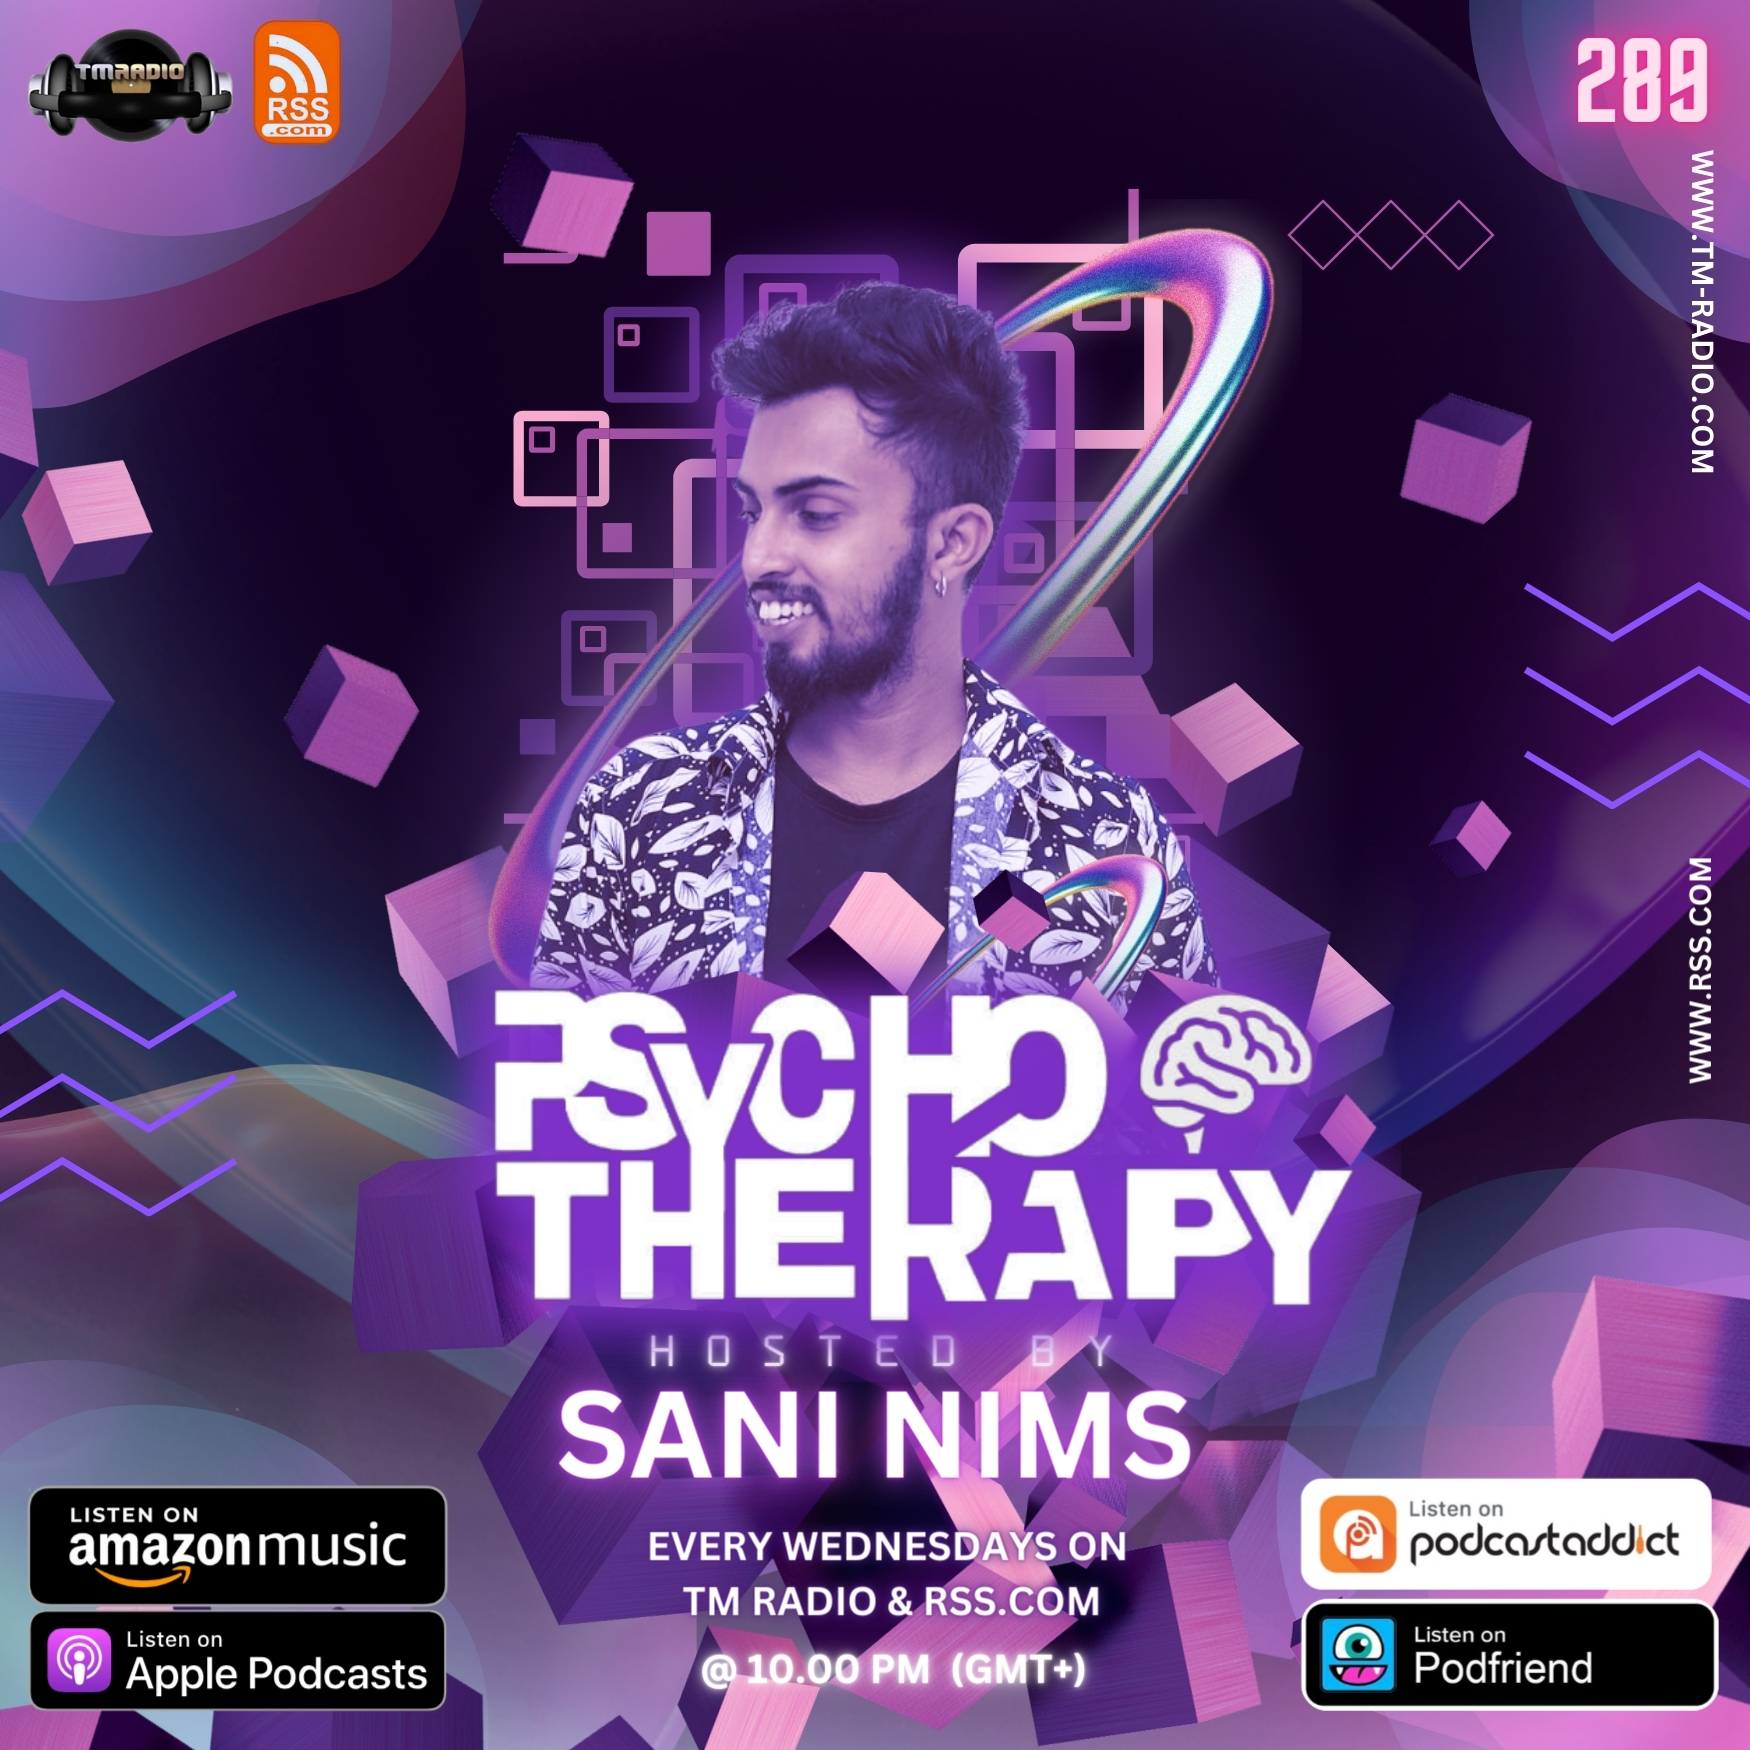 Next Episode PSYCHO THERAPY EP 289 BY SANI NIMS ON TM RADIO (premieres on May 1st)